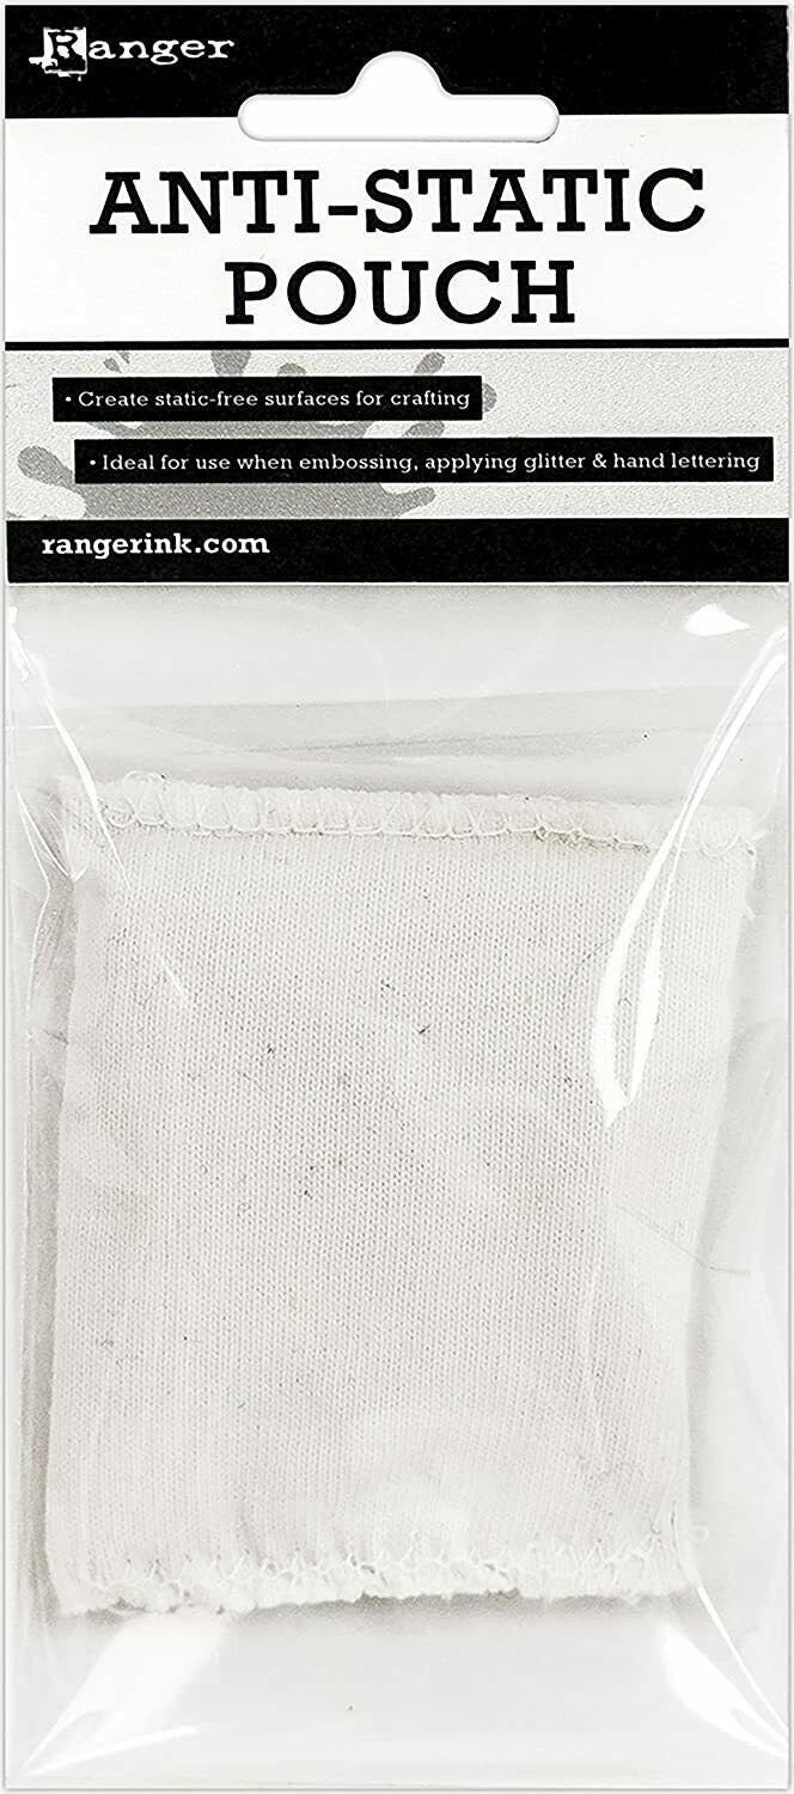 Ranger Anti-Static Pouch For Heat Embossing / Card Making / Scrapbooking / Applying Glitter / Hand Lettering image 1